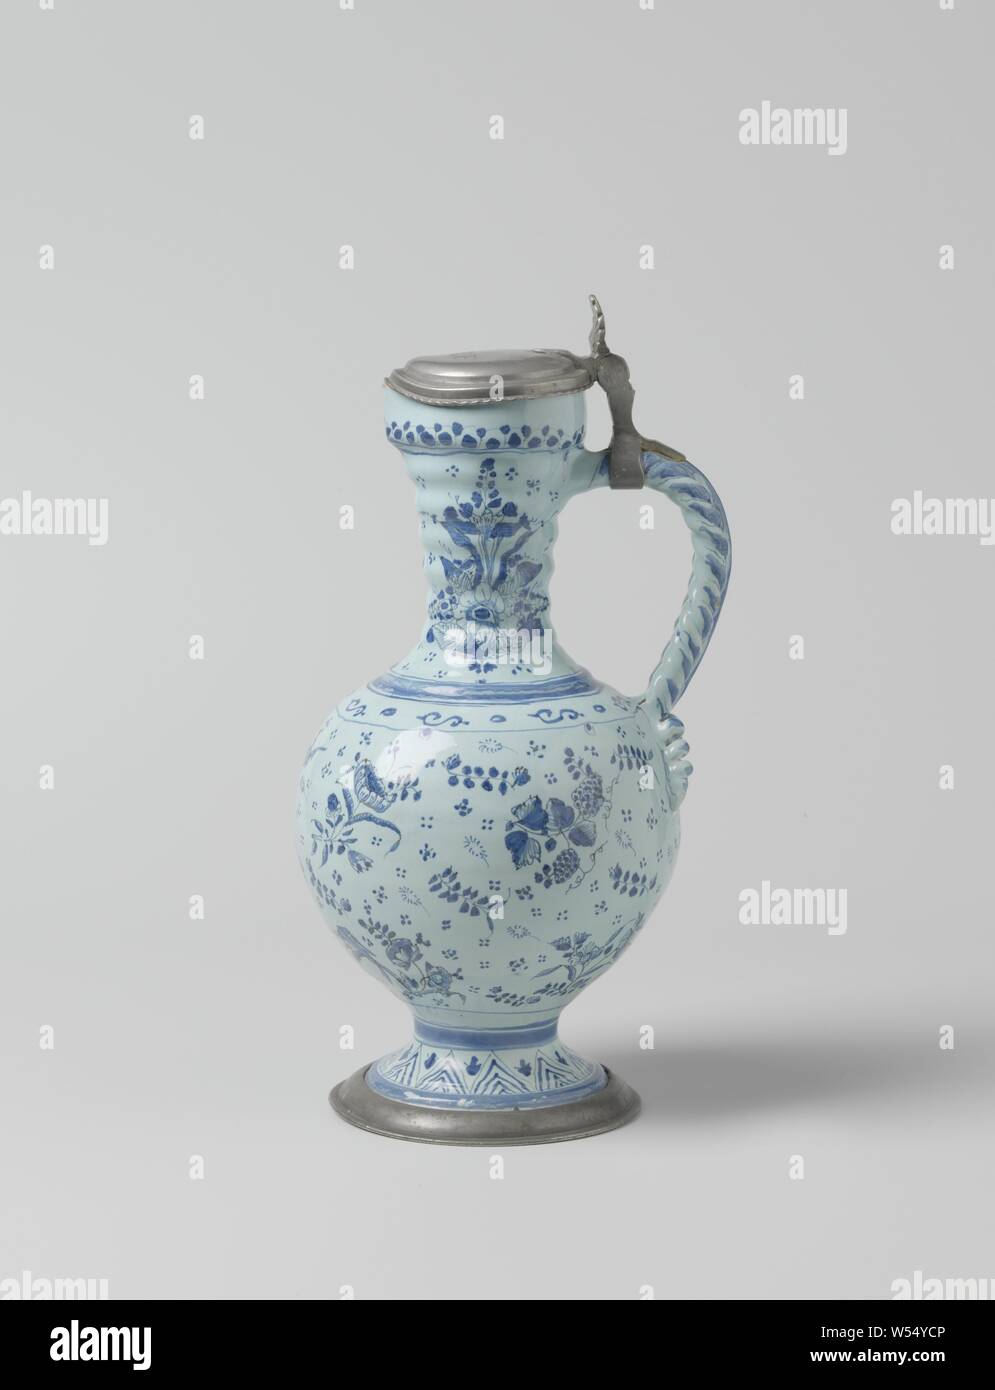 Jug with pewter lid, painted with scatter motif, Jug of blue painted faience, with a blue ground, a pewter foot ring and a pewter lid. The jug has a foot, a spherical belly and a cylindrical ribbed neck. The ear is braided and ends in two curls on the belly. On the jug is a scatter motif painted consisting of flowers, birds, branches with leaves and fruits, a peacock and rosettes. In the top of the lid are the letters M.C.H. engraved. The jug is marked., Johannes Polts, Hanau, c. 1700, earthenware, tin glaze, h 30.8 cm h 27.8 cm w 16.2 cm d 14.5 cm Stock Photo